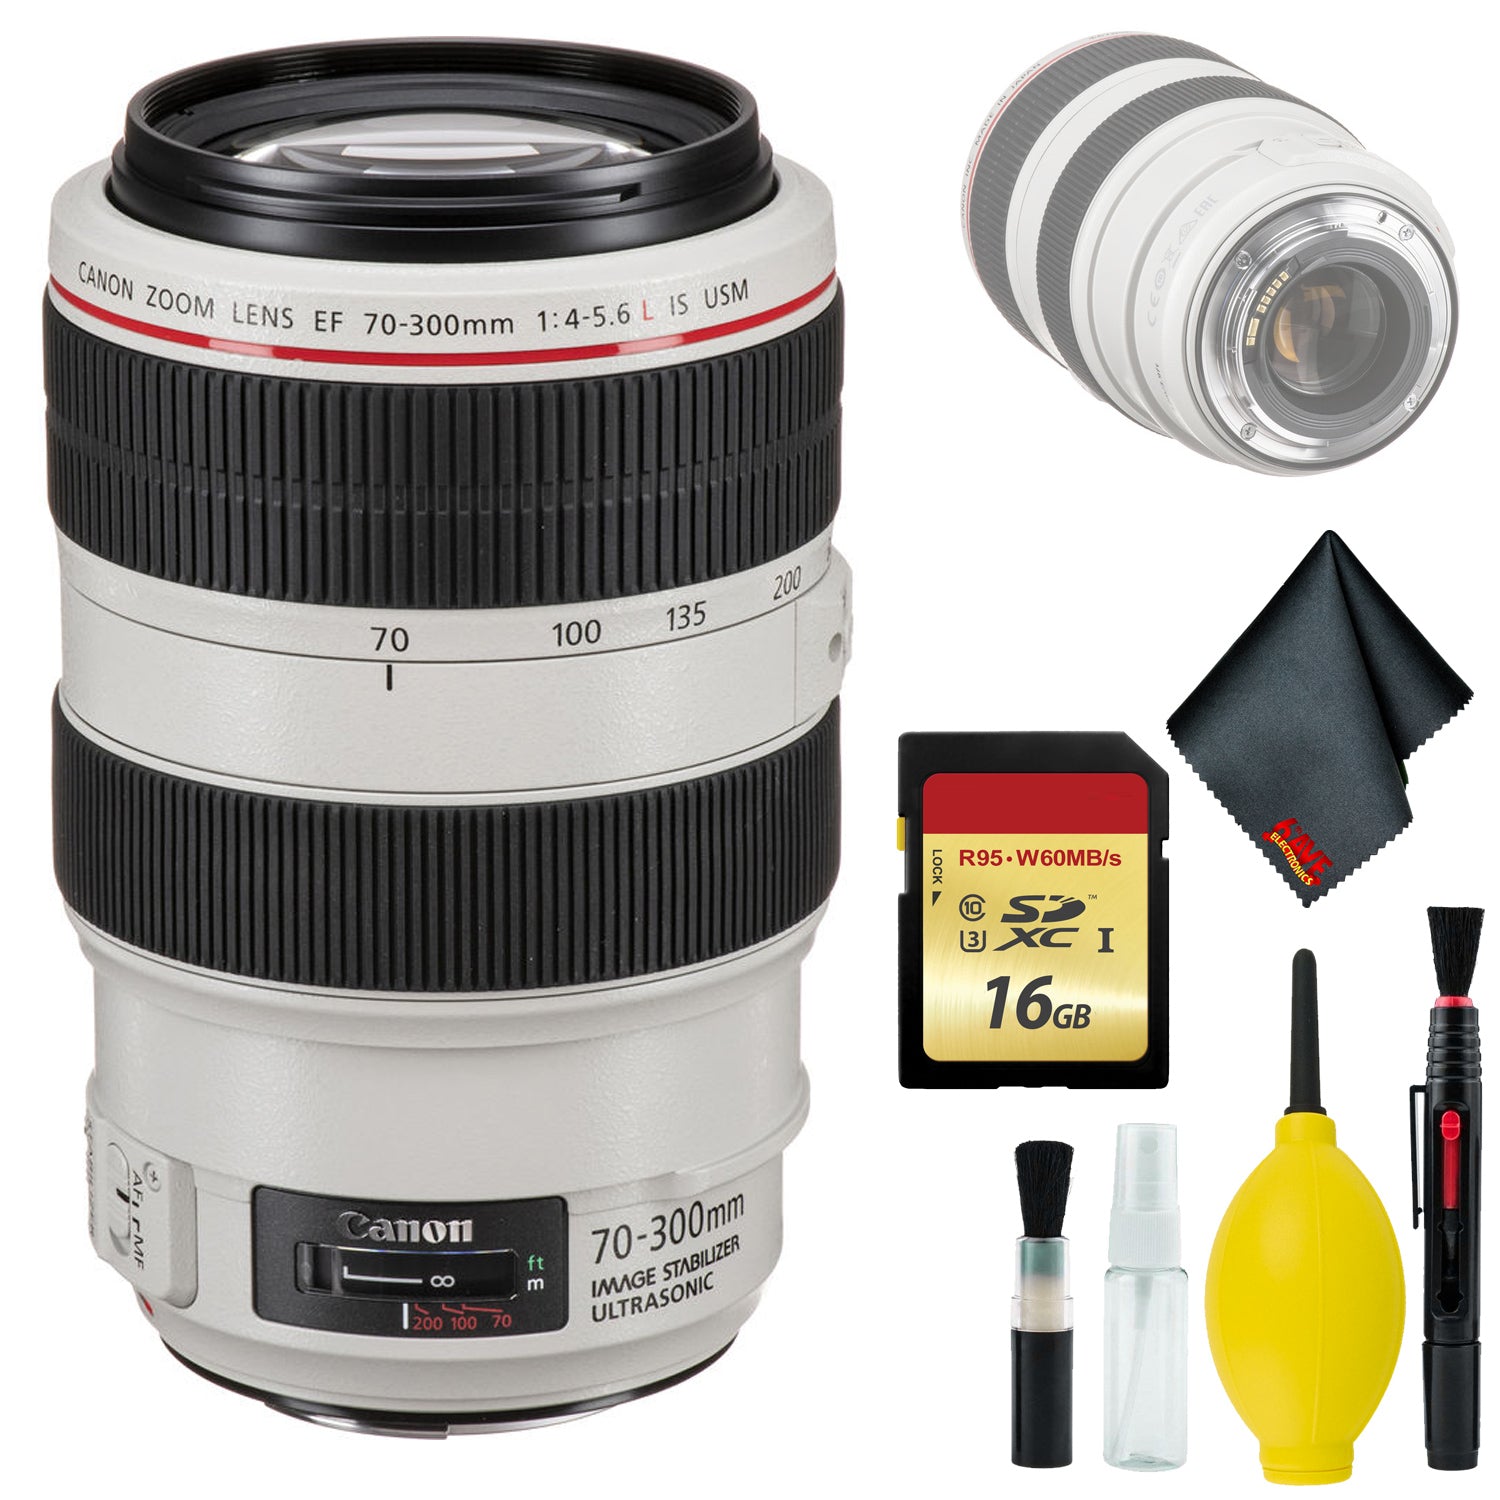 Canon EF 70-300mm f/4-5.6L IS USM Lens - Table Top Tripod, Lens Cleaning Kit & LCD Screen Protectors Blower Brush Lens Pen